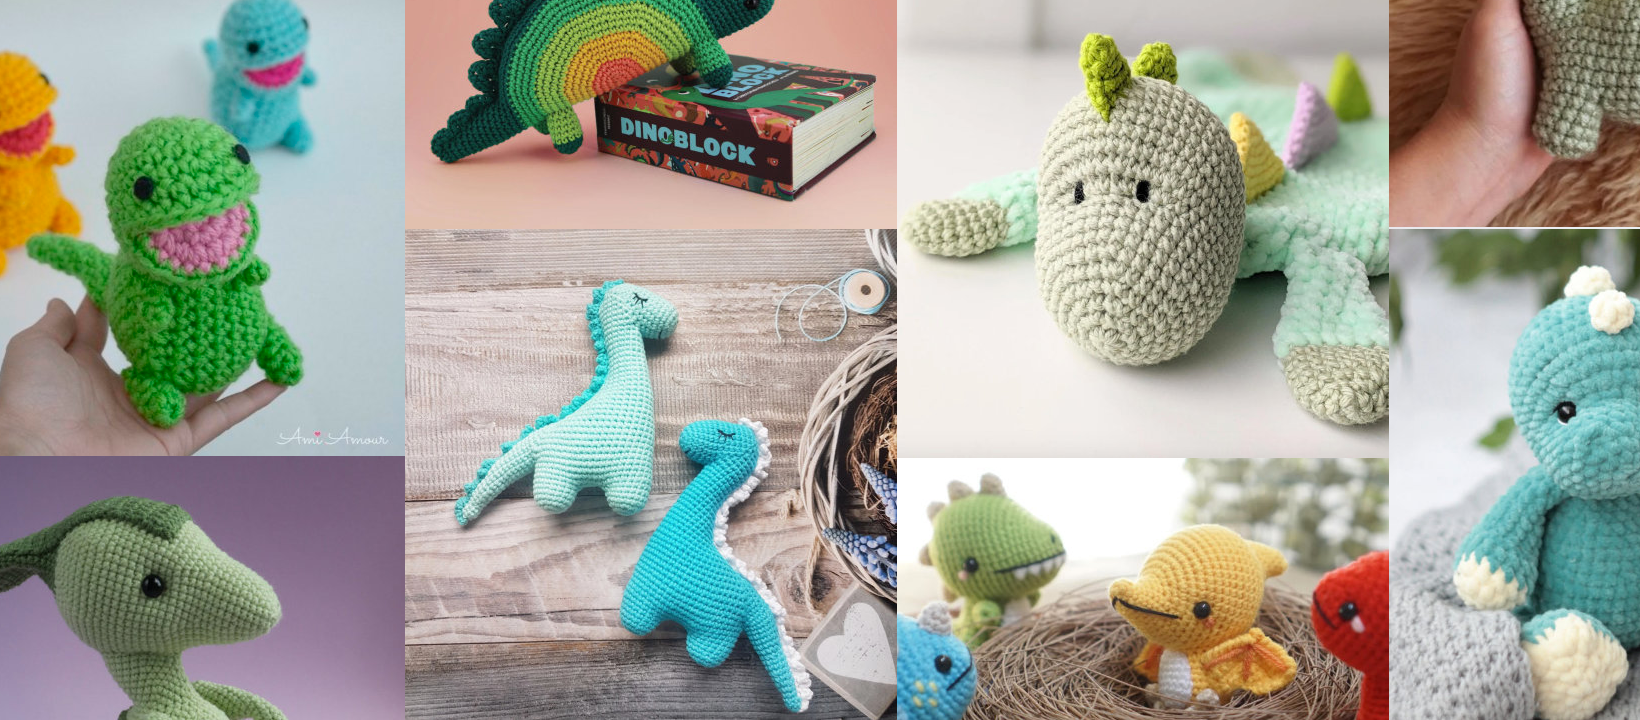 PP OPOUNT Crochet Kit for Beginners- 4 PCS Mini Size Crochet Animals,  Beginner Crochet Kit for Adults Includes Step-by-Step Instructions and  Video